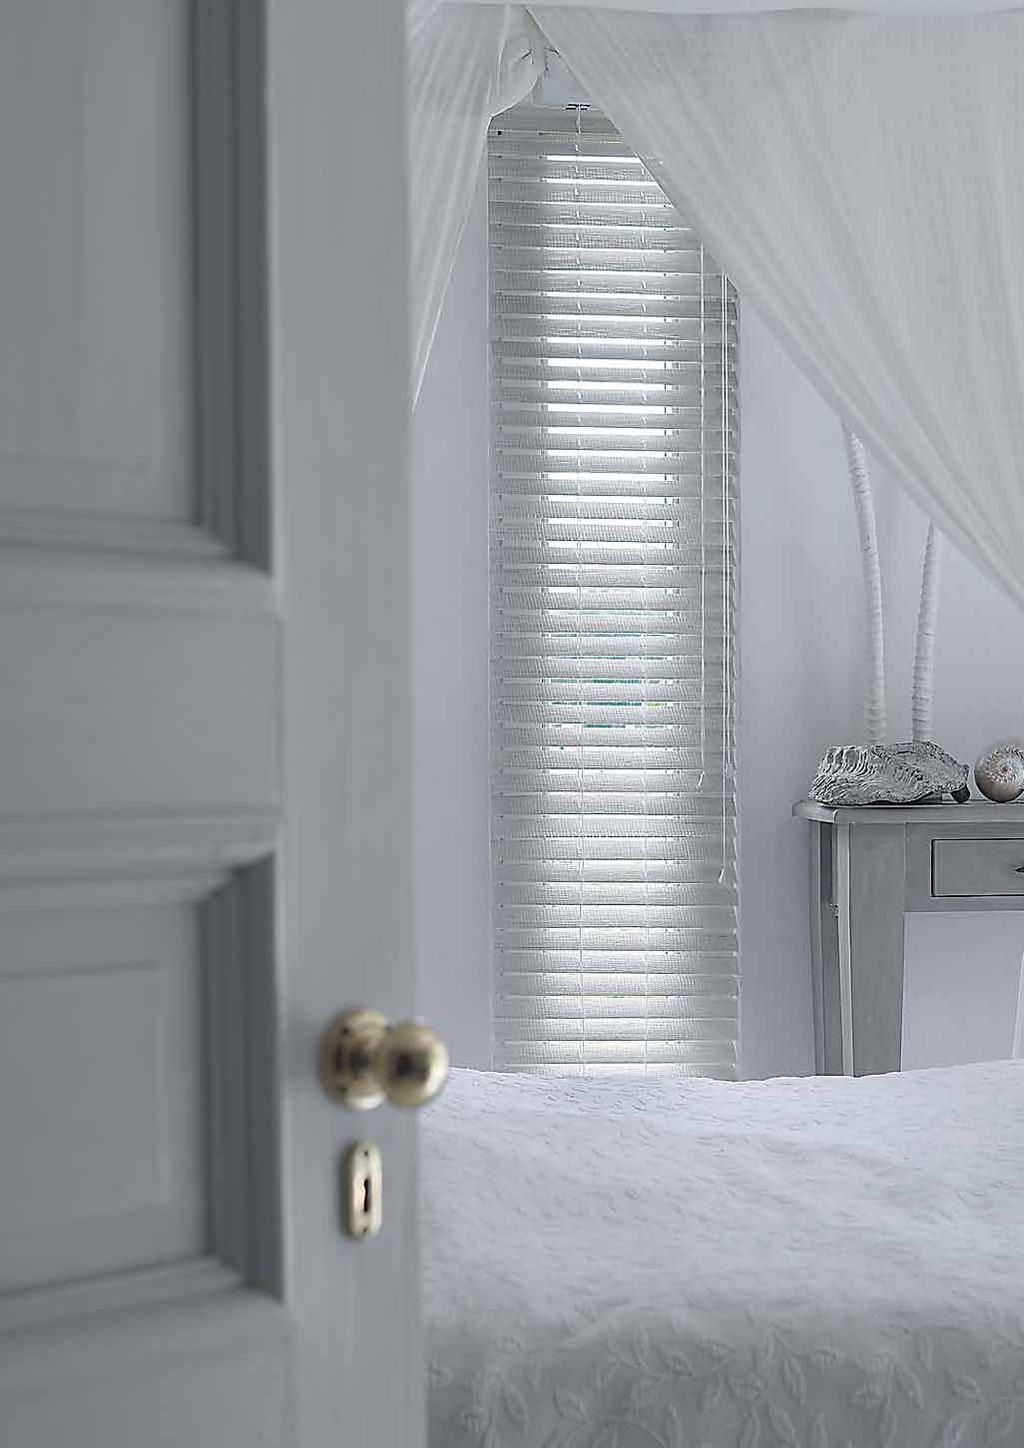 Our Timbercraft Luxury Wood Collection Tough, natural and warm, as only wood can be, our designer Timber blinds are hand built in our own factory.